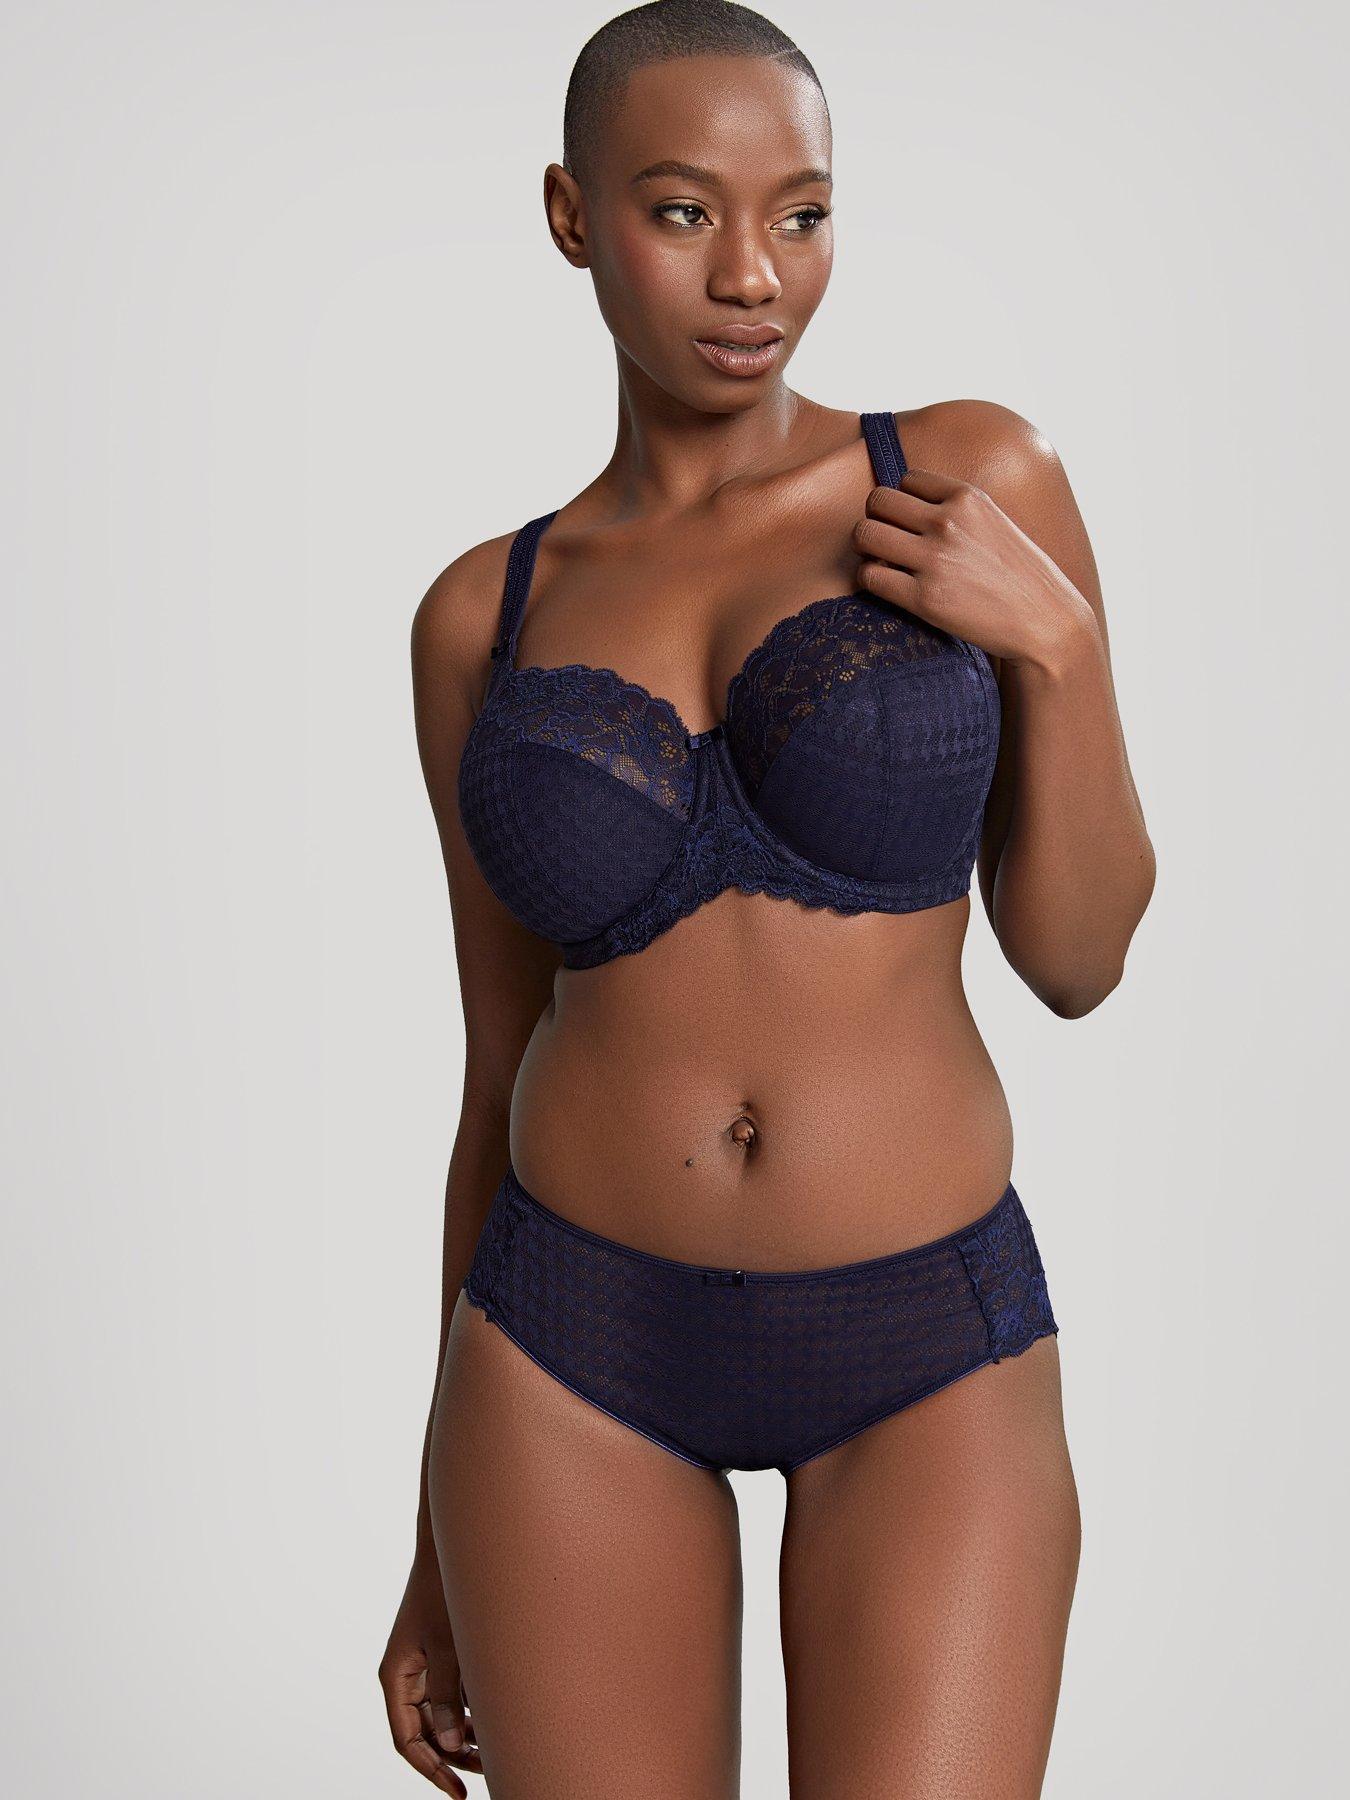 Envy Full Cup In Sand & Black - Panache